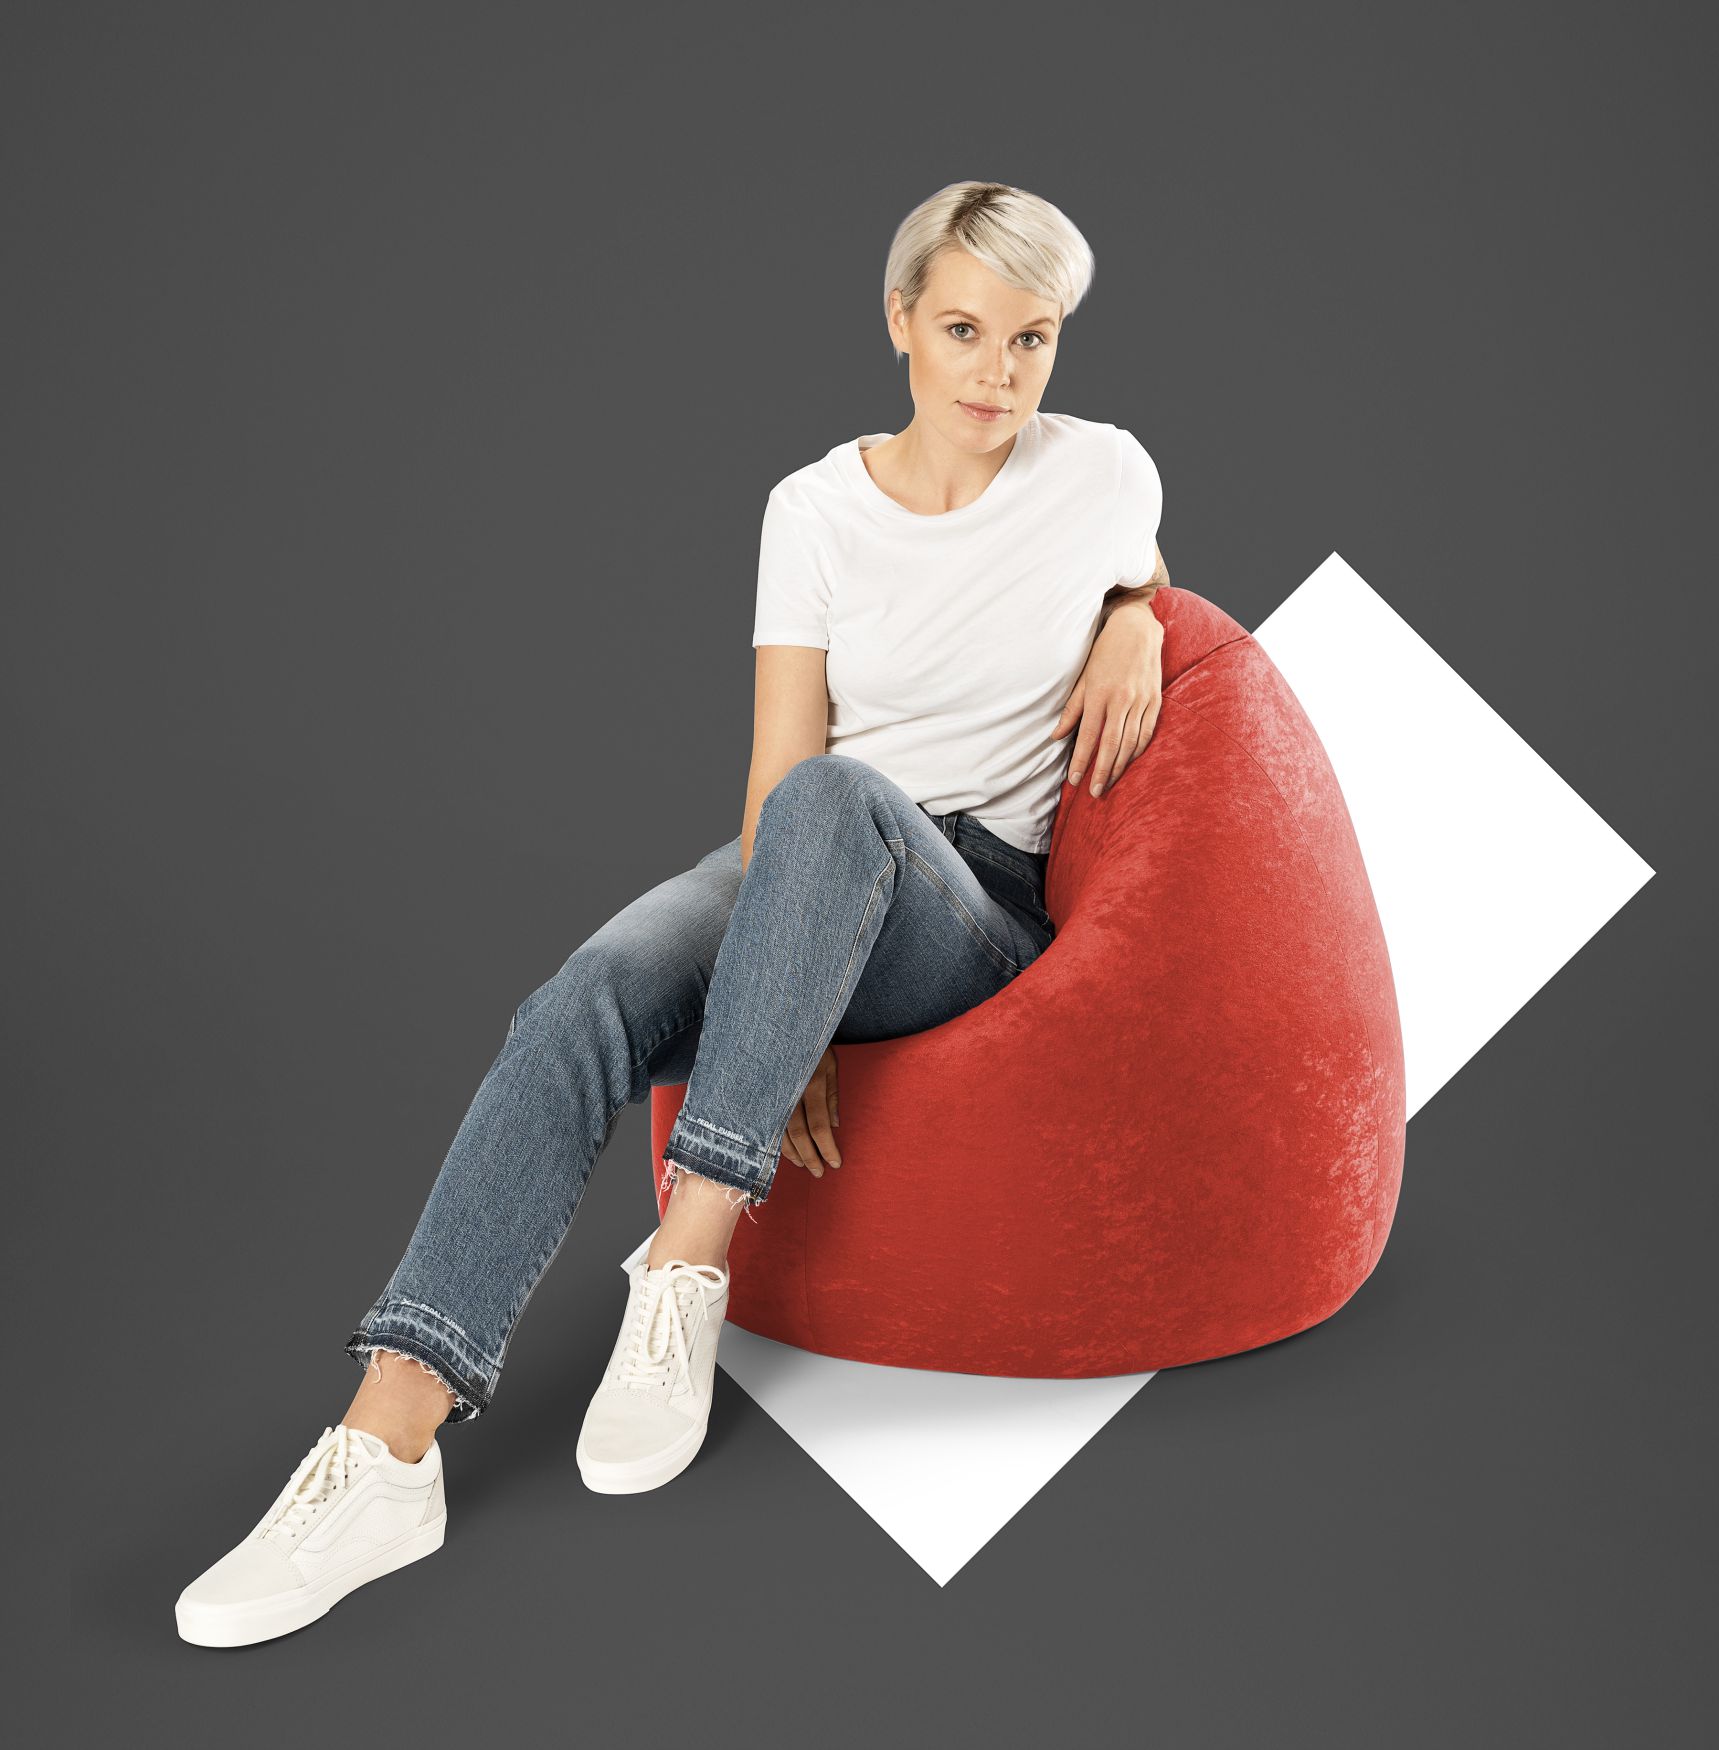 sitting point beanbag easy xl tomaat